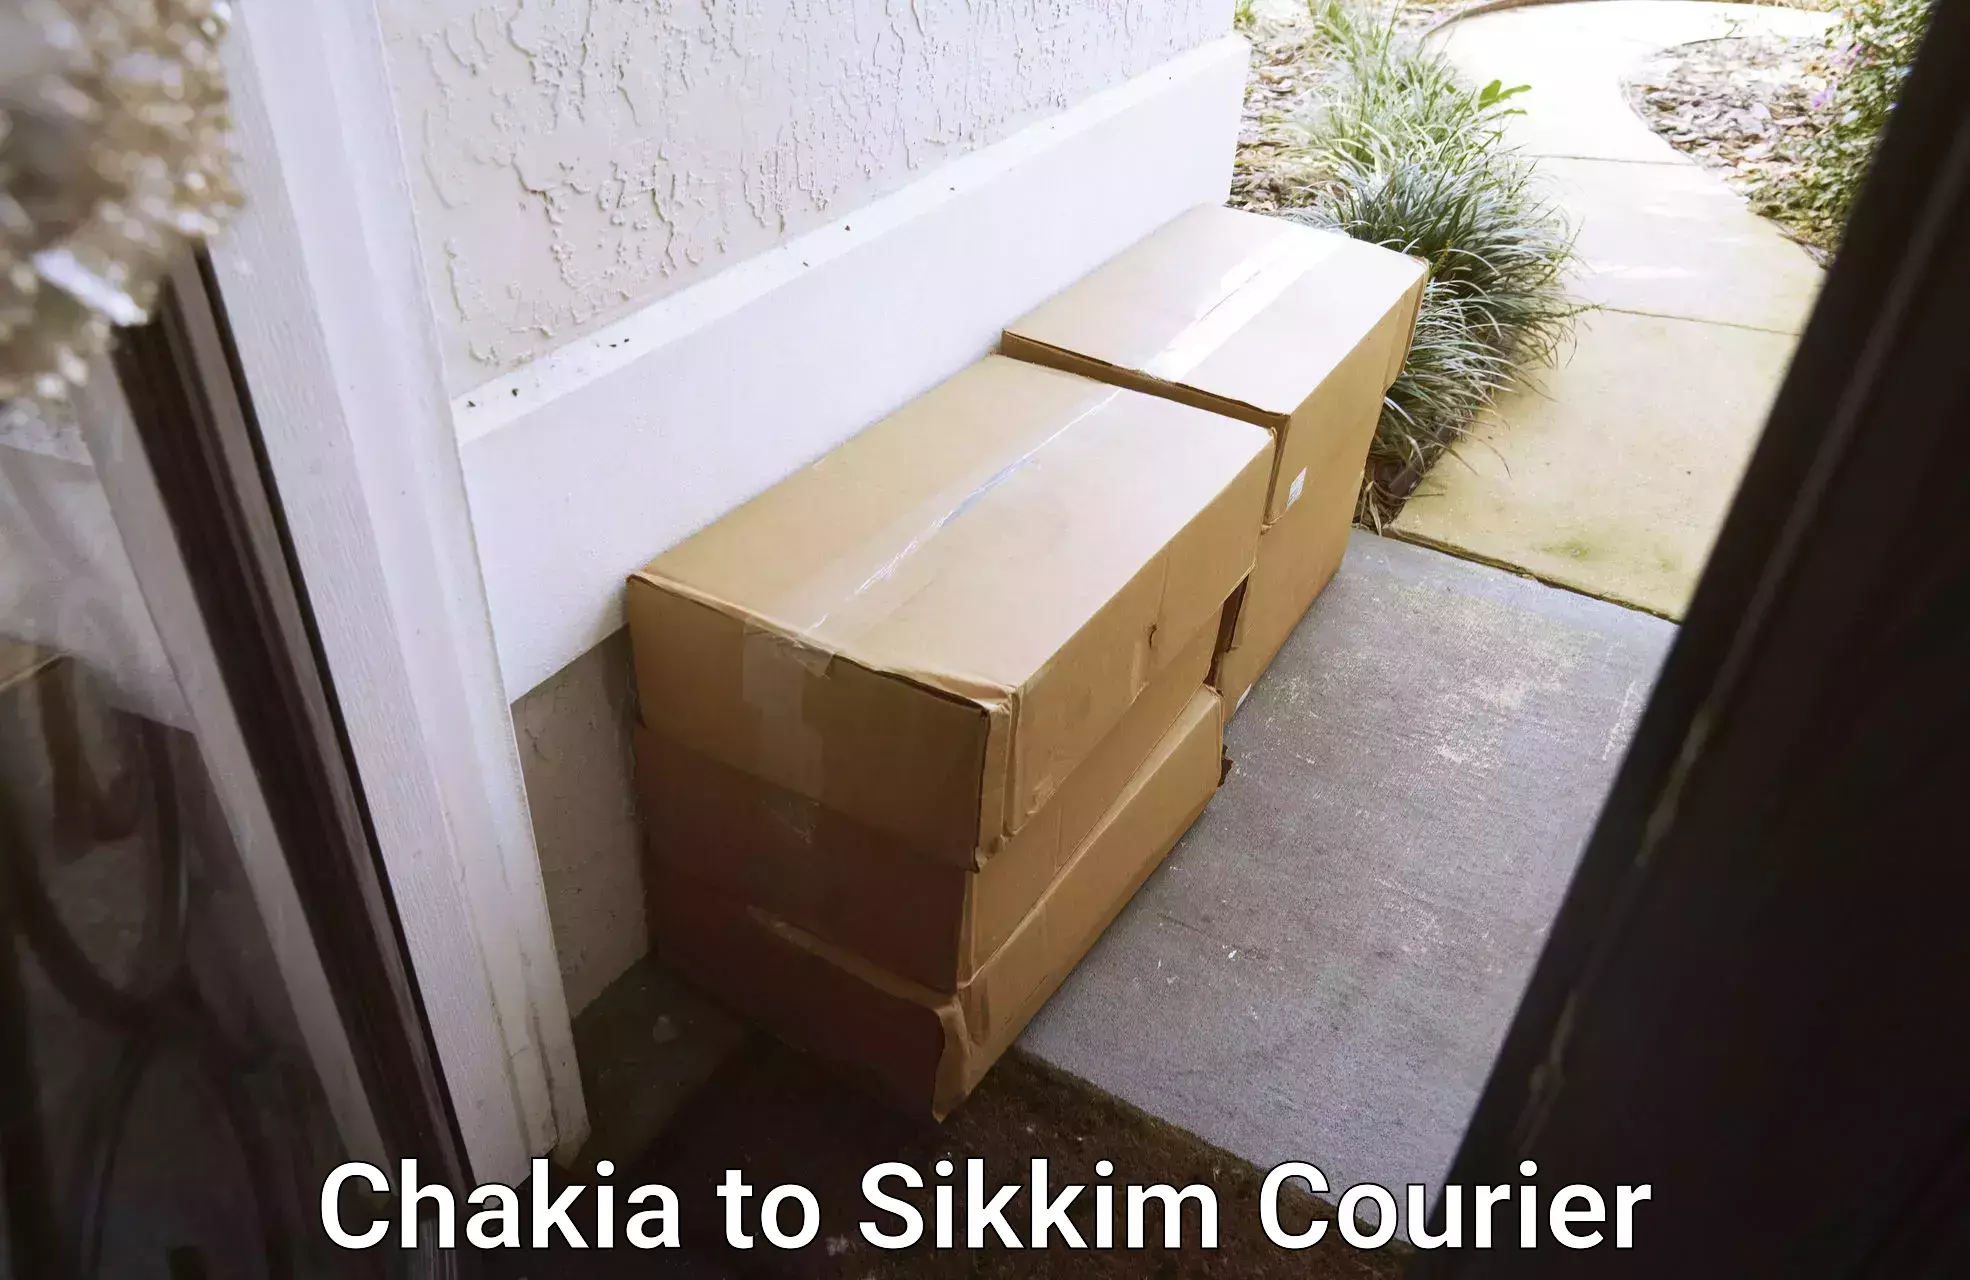 Quality furniture movers Chakia to Pelling